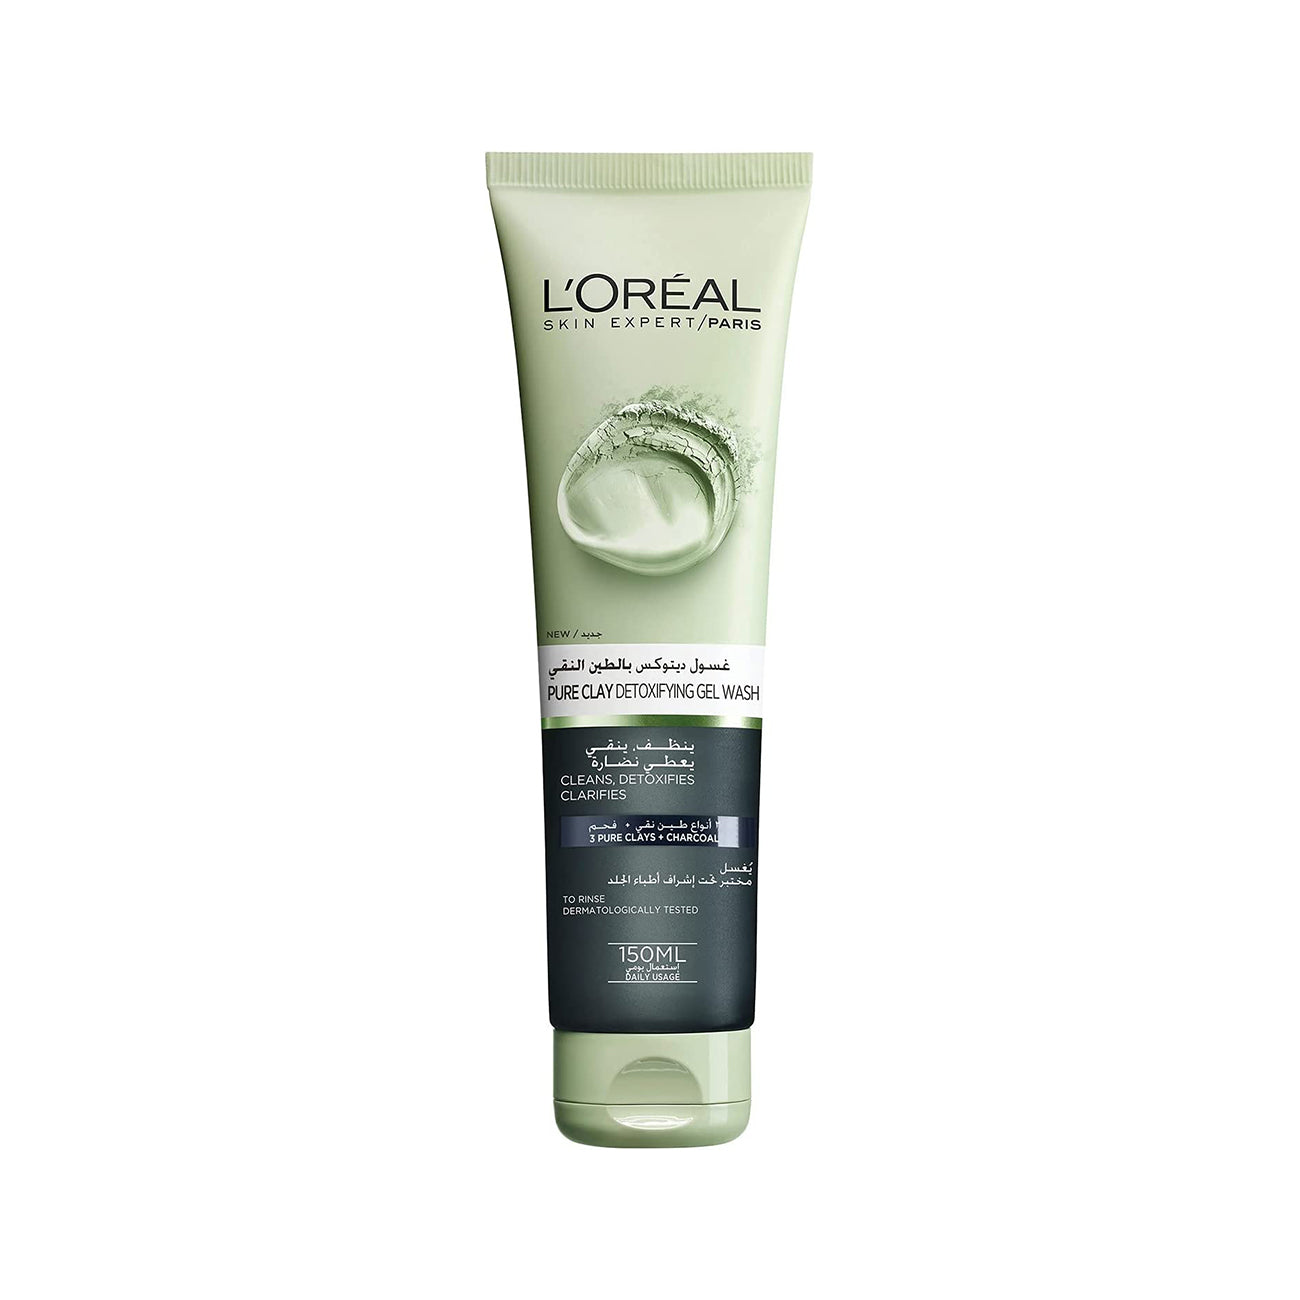 L'Oreal Paris Pure Clay Black Face Wash with Charcoal, Detoxifies and Clarifies, 150ml